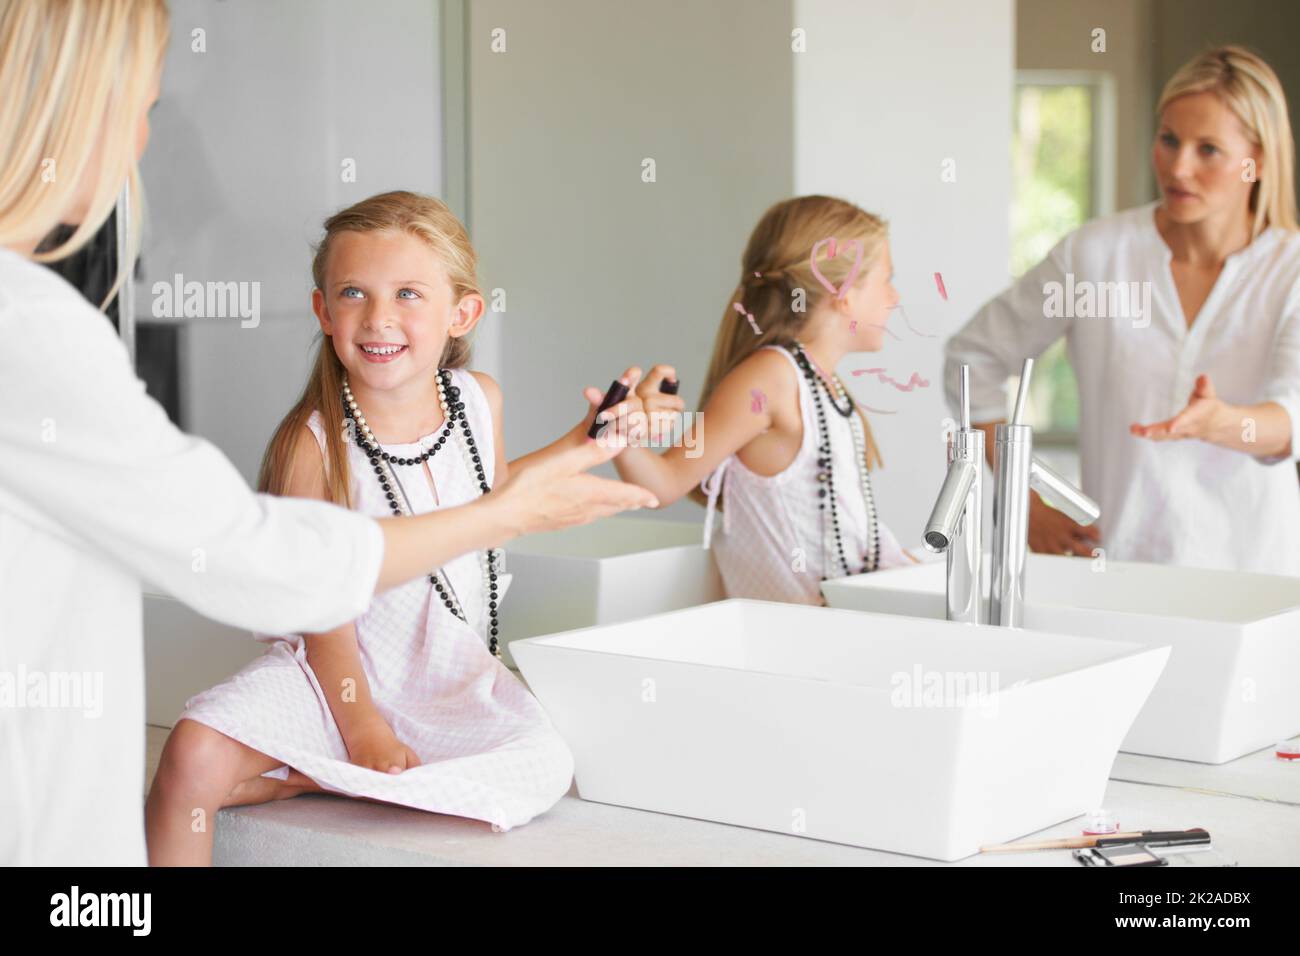 Why did you do this. Little girl in the bathroom in trouble for drawing on the mirror. Stock Photo